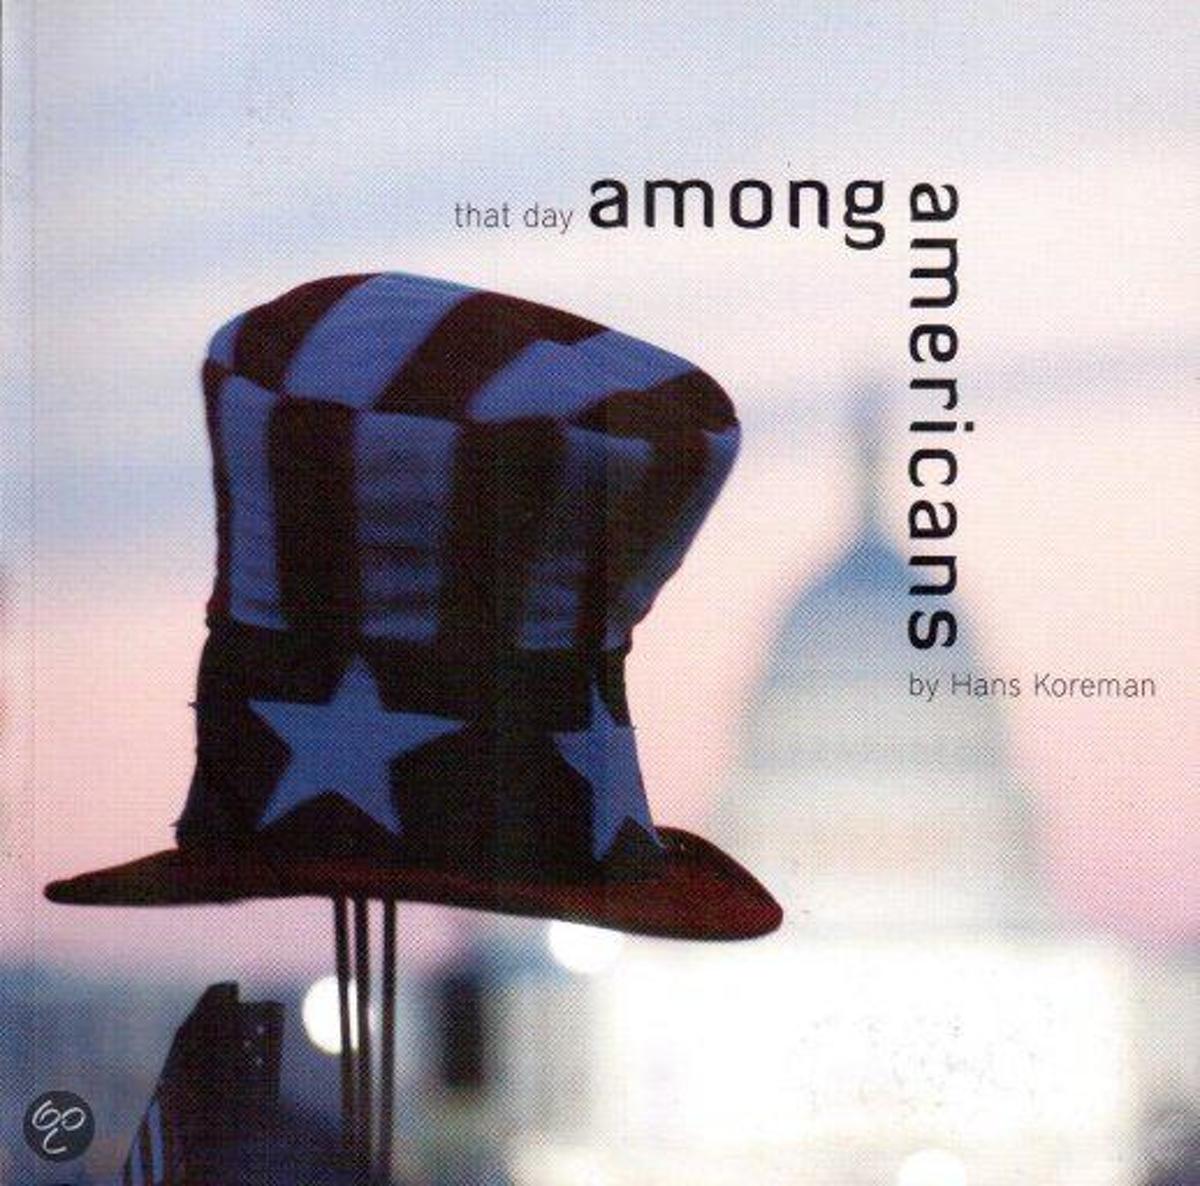 Among Americans - that day